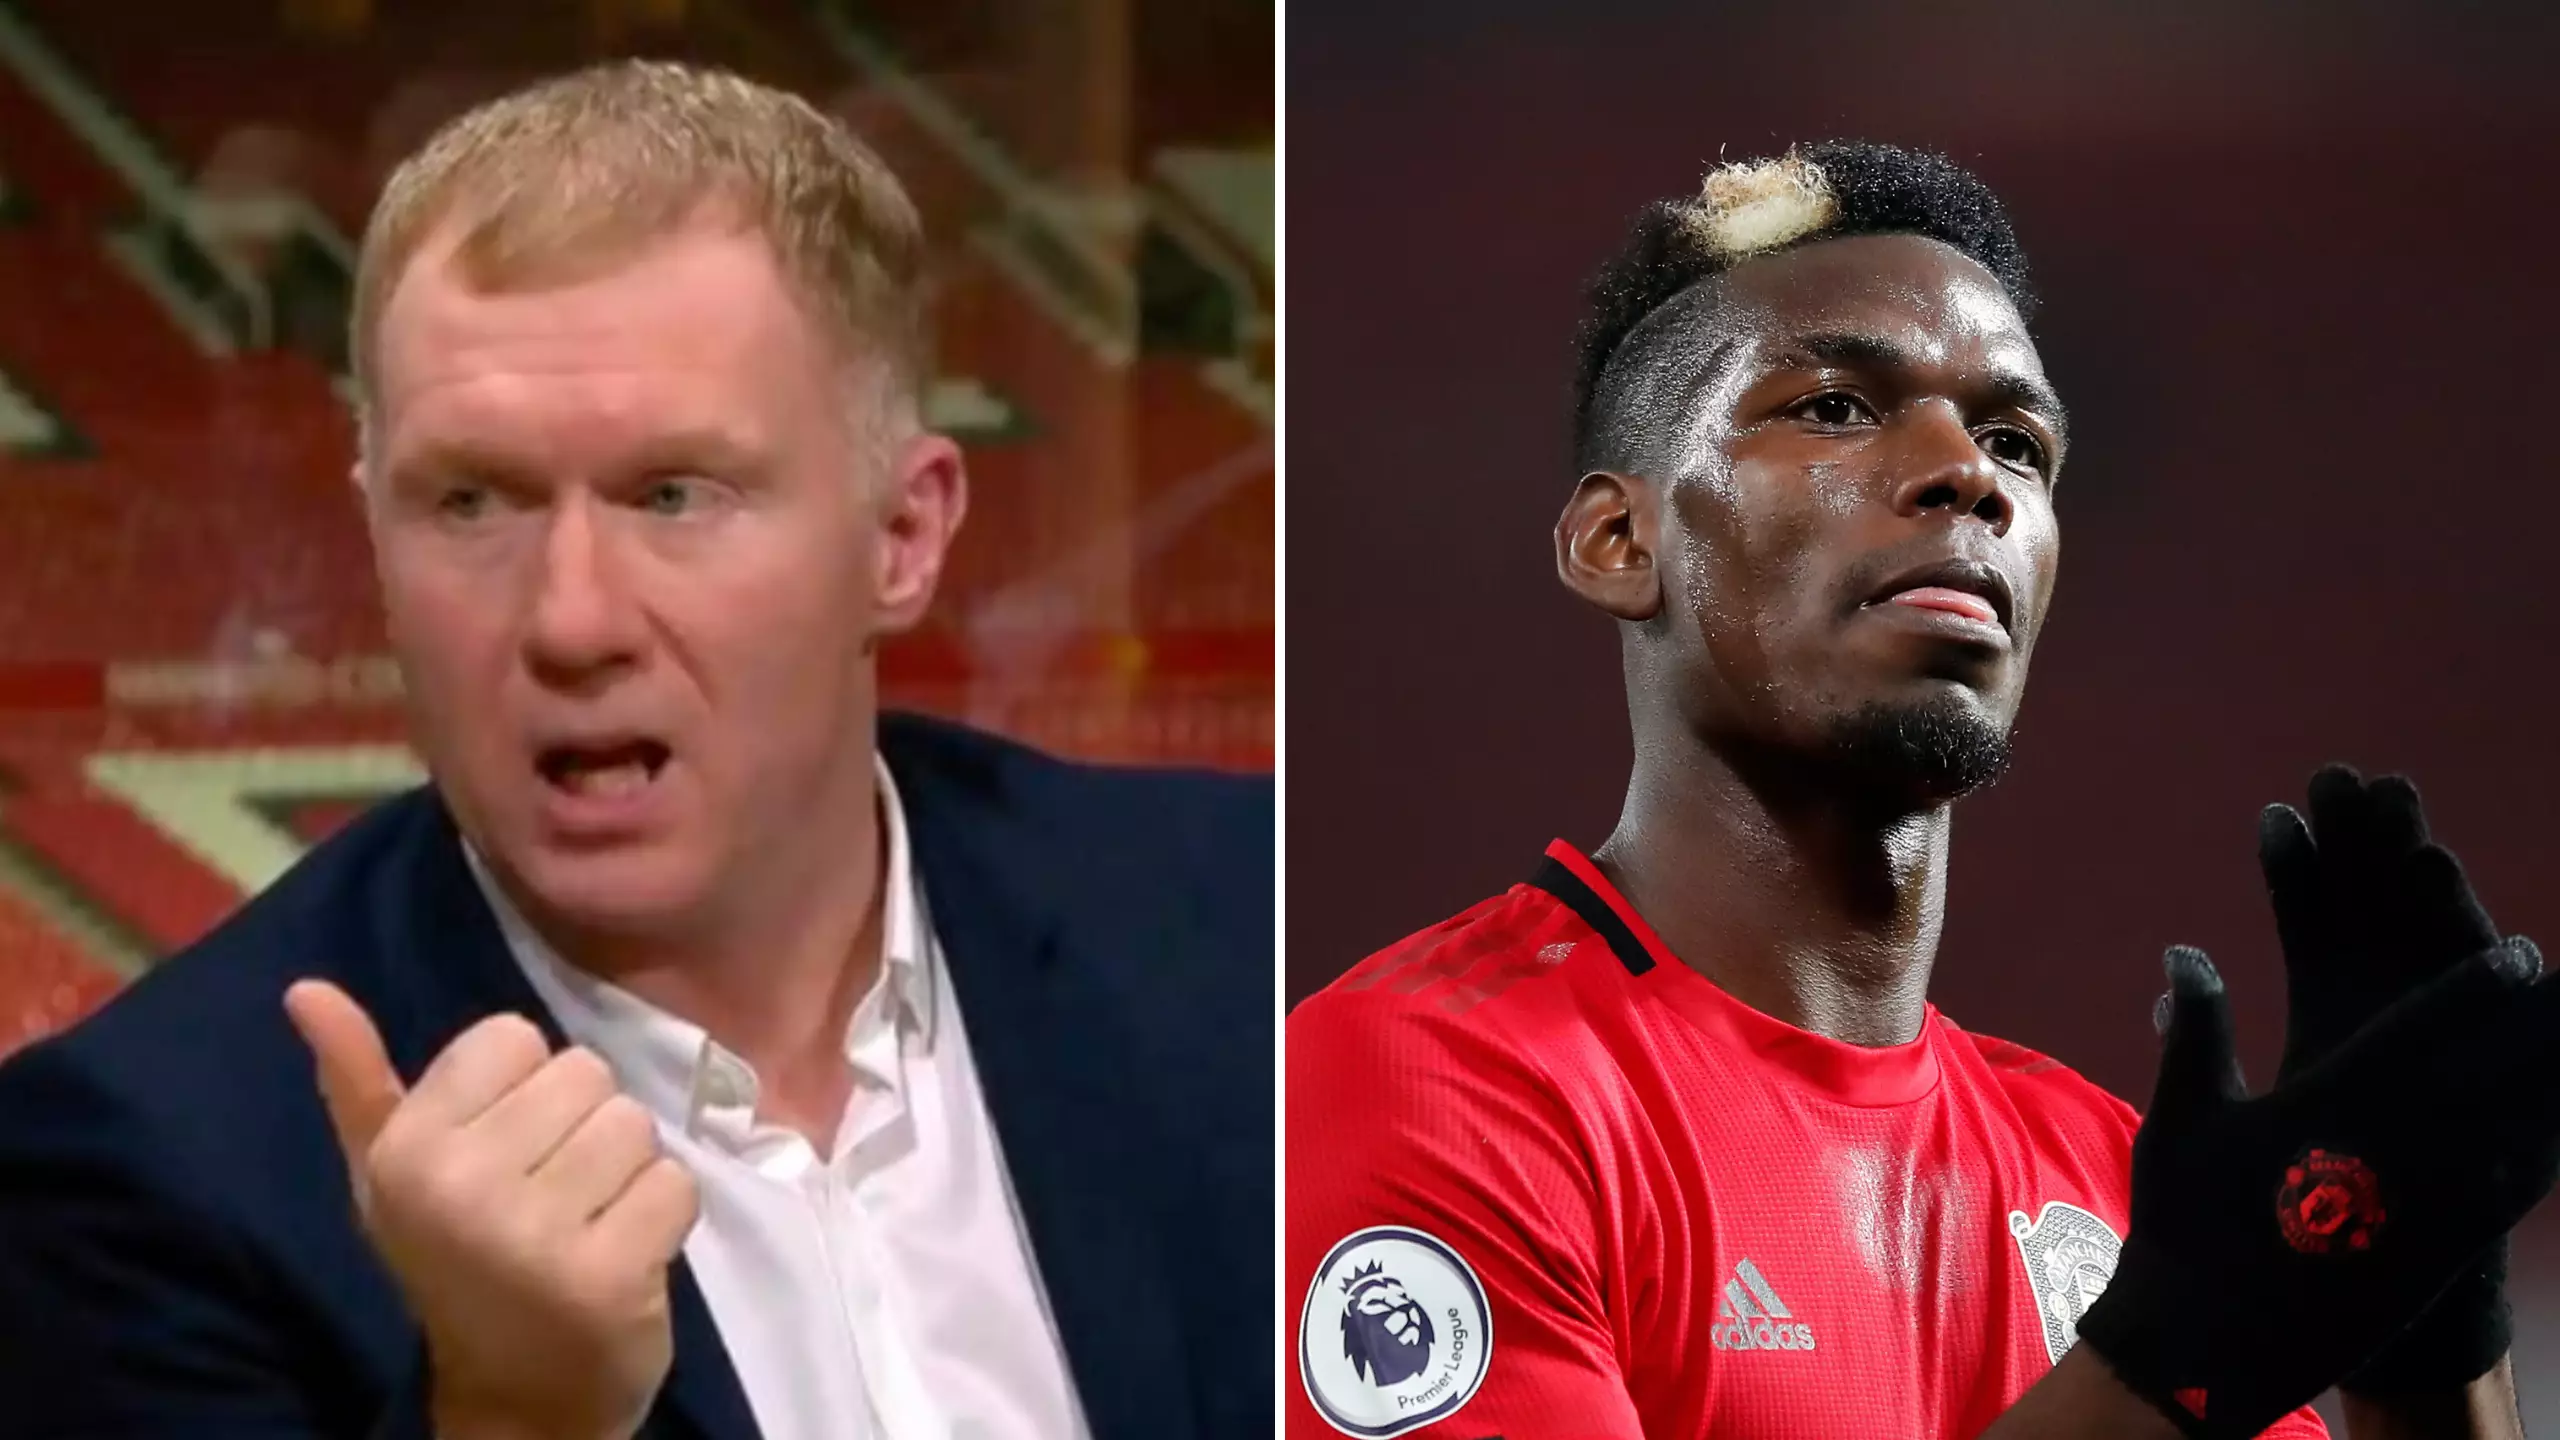 Paul Scholes Gives Brutal Assessment Of Paul Pogba's Manchester United Future